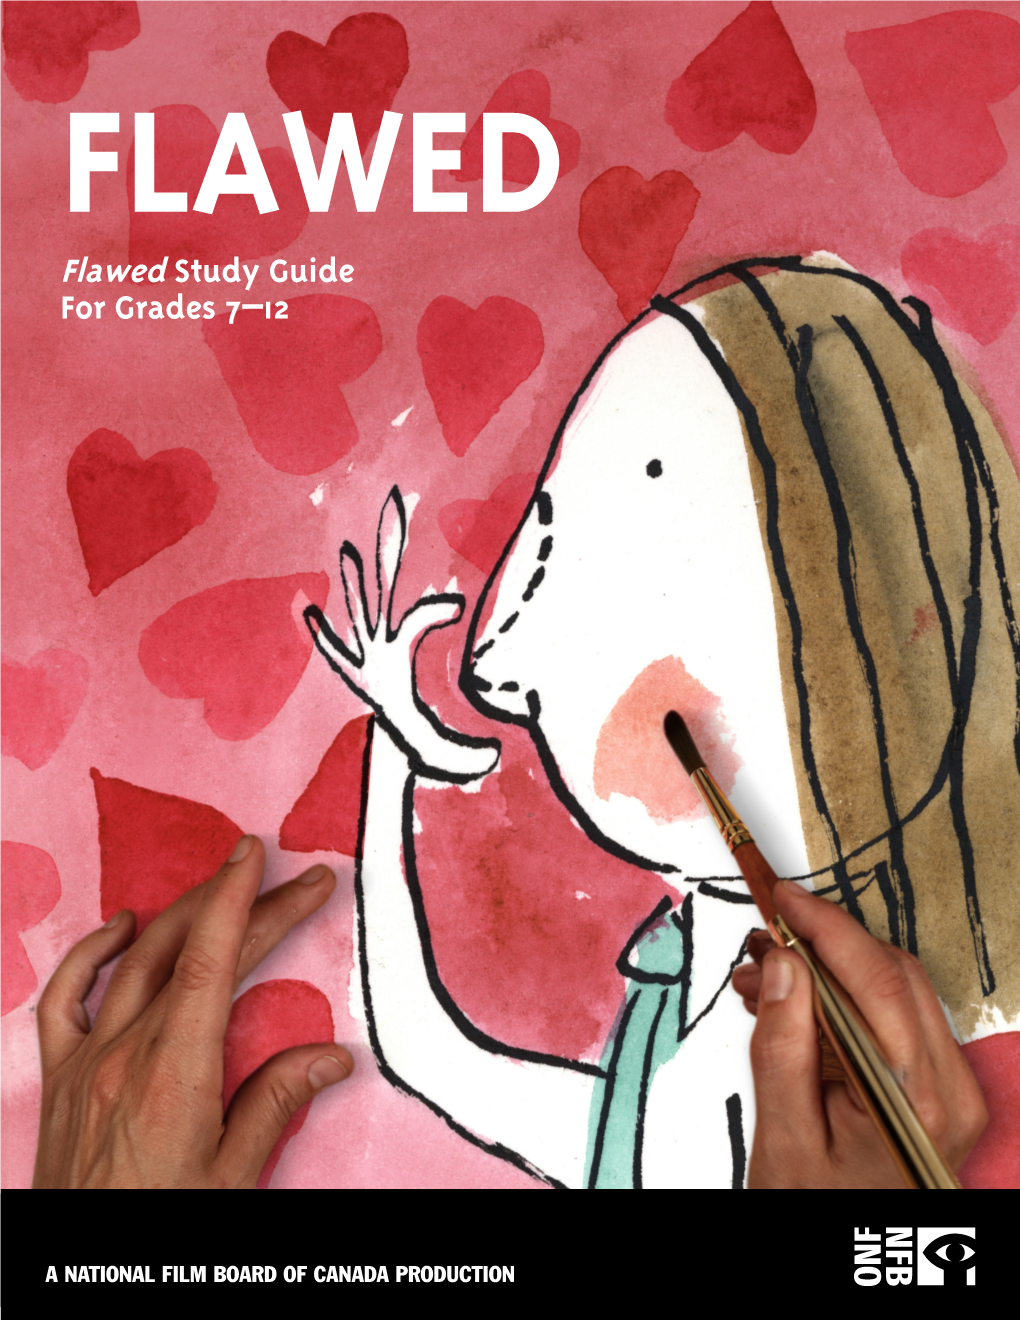 Download the Flawed Study Guide Here